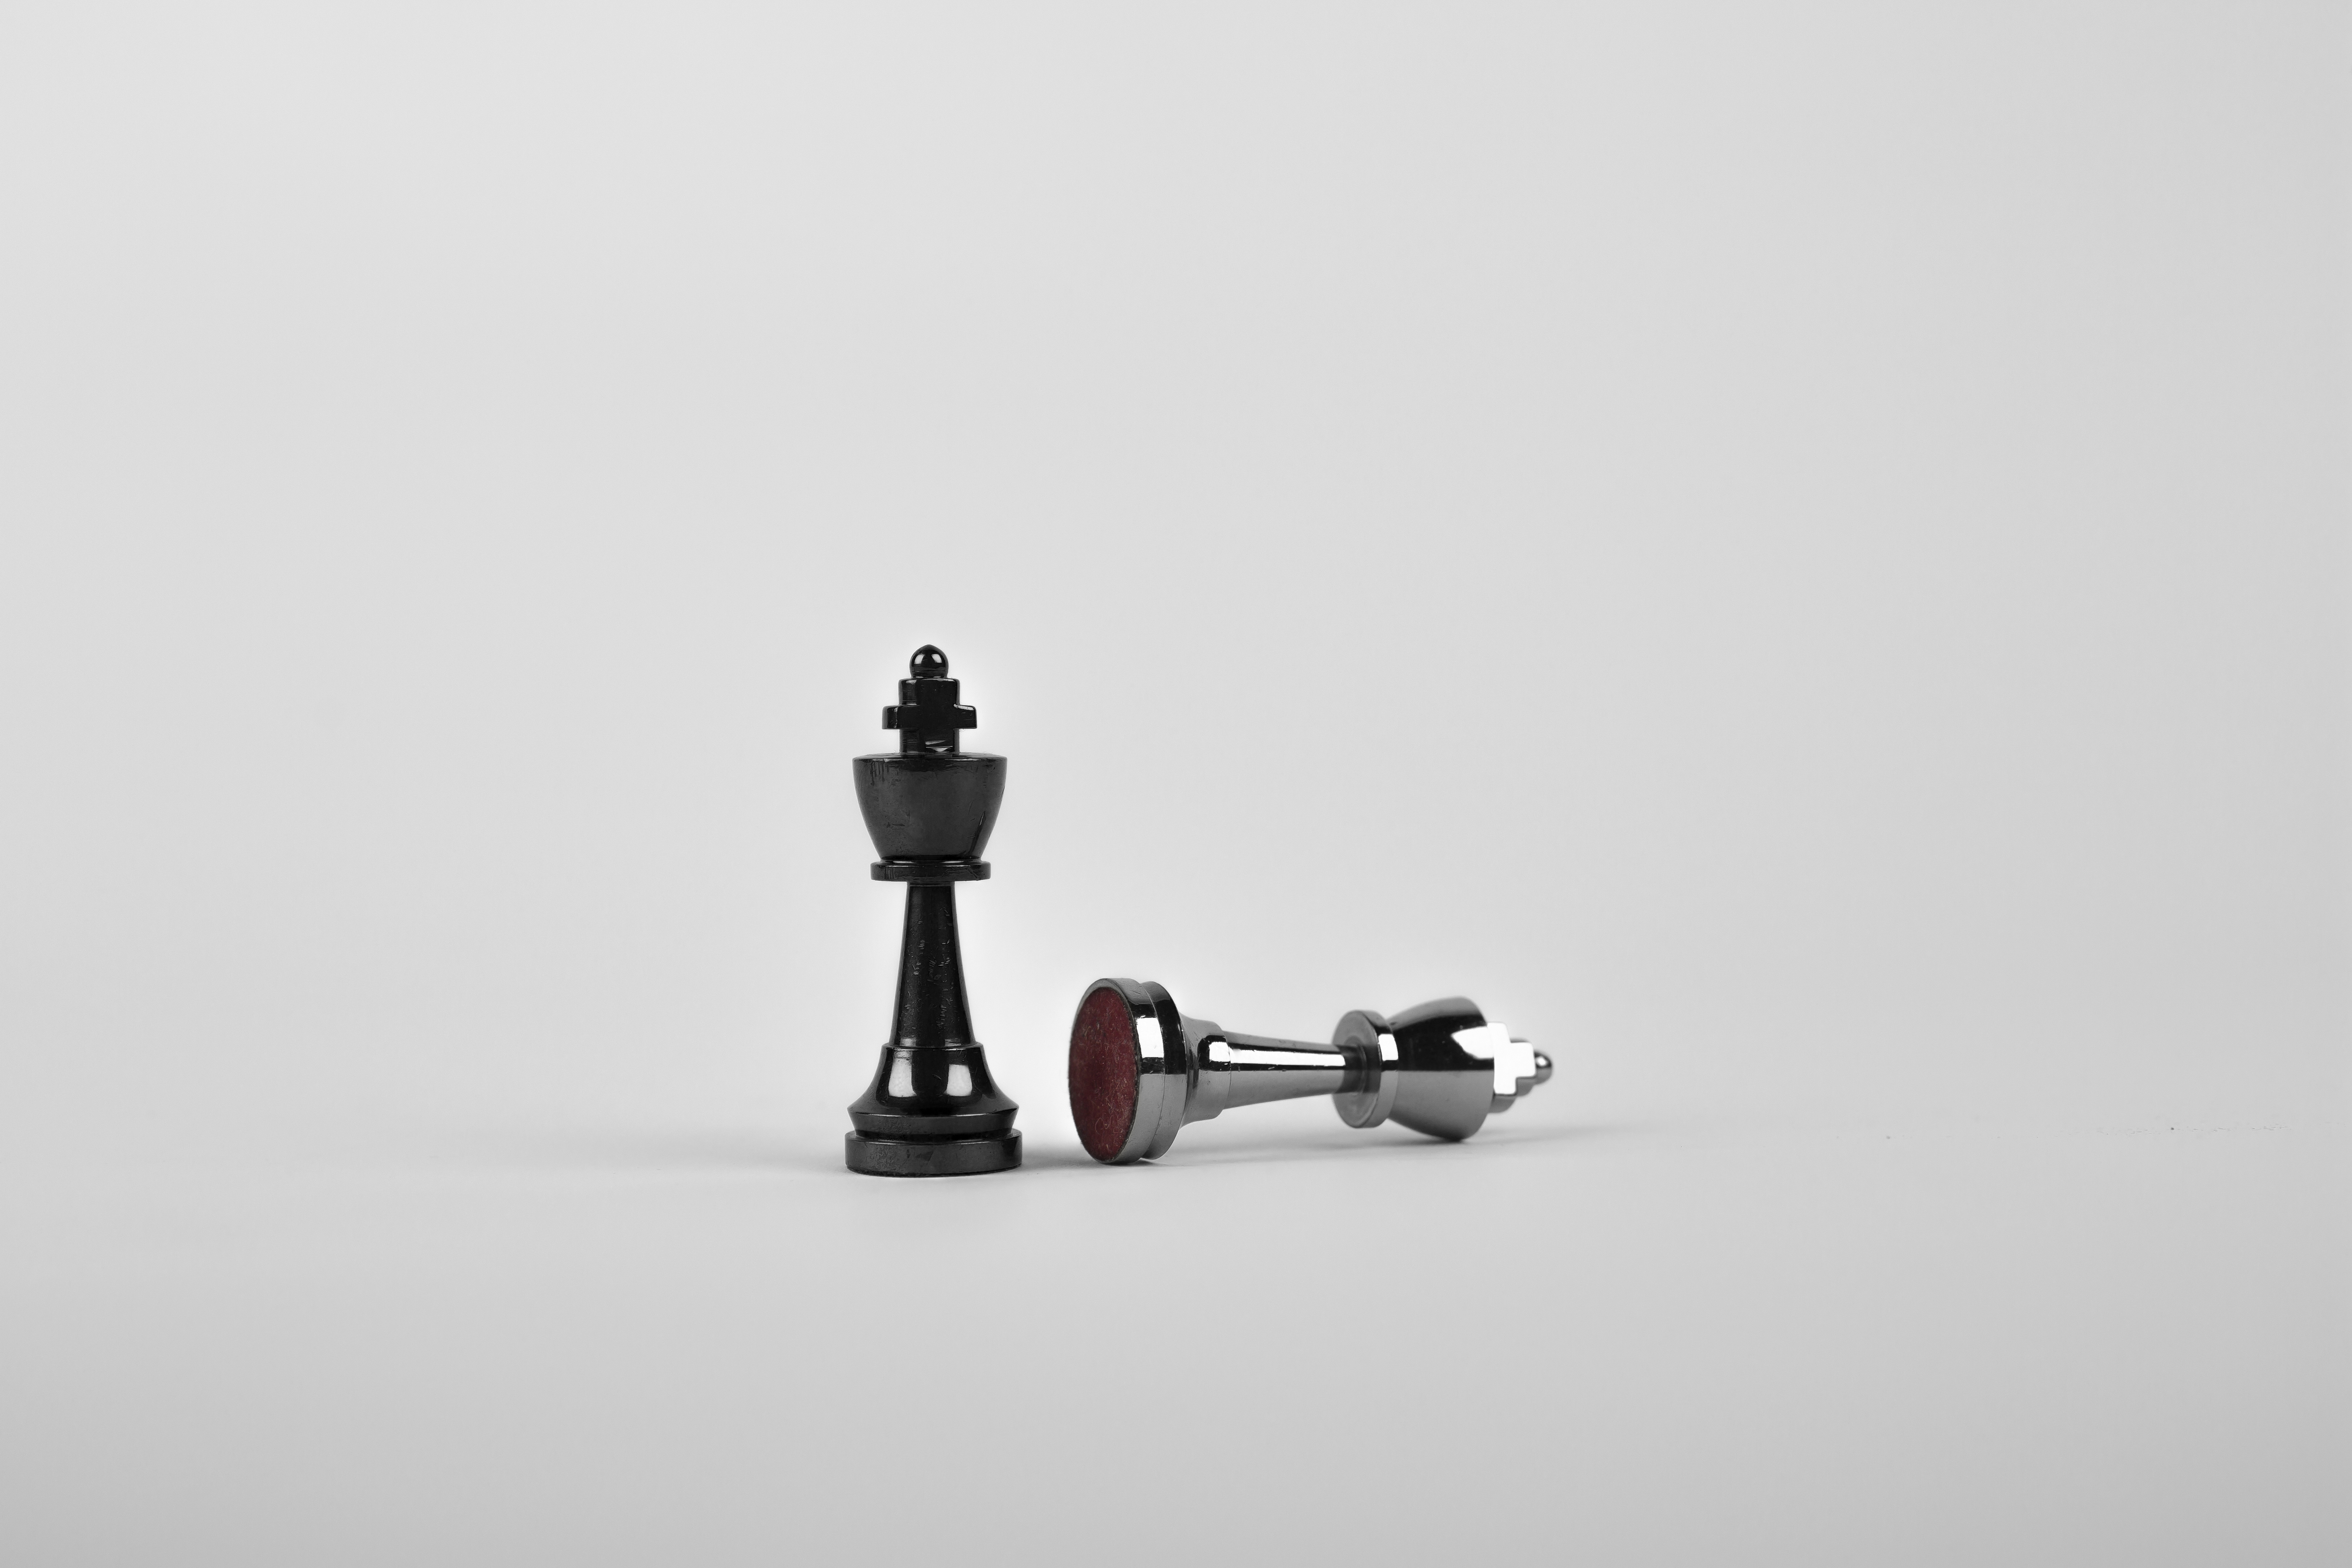 chess, minimalism, chess pieces, chessmen, king cellphone